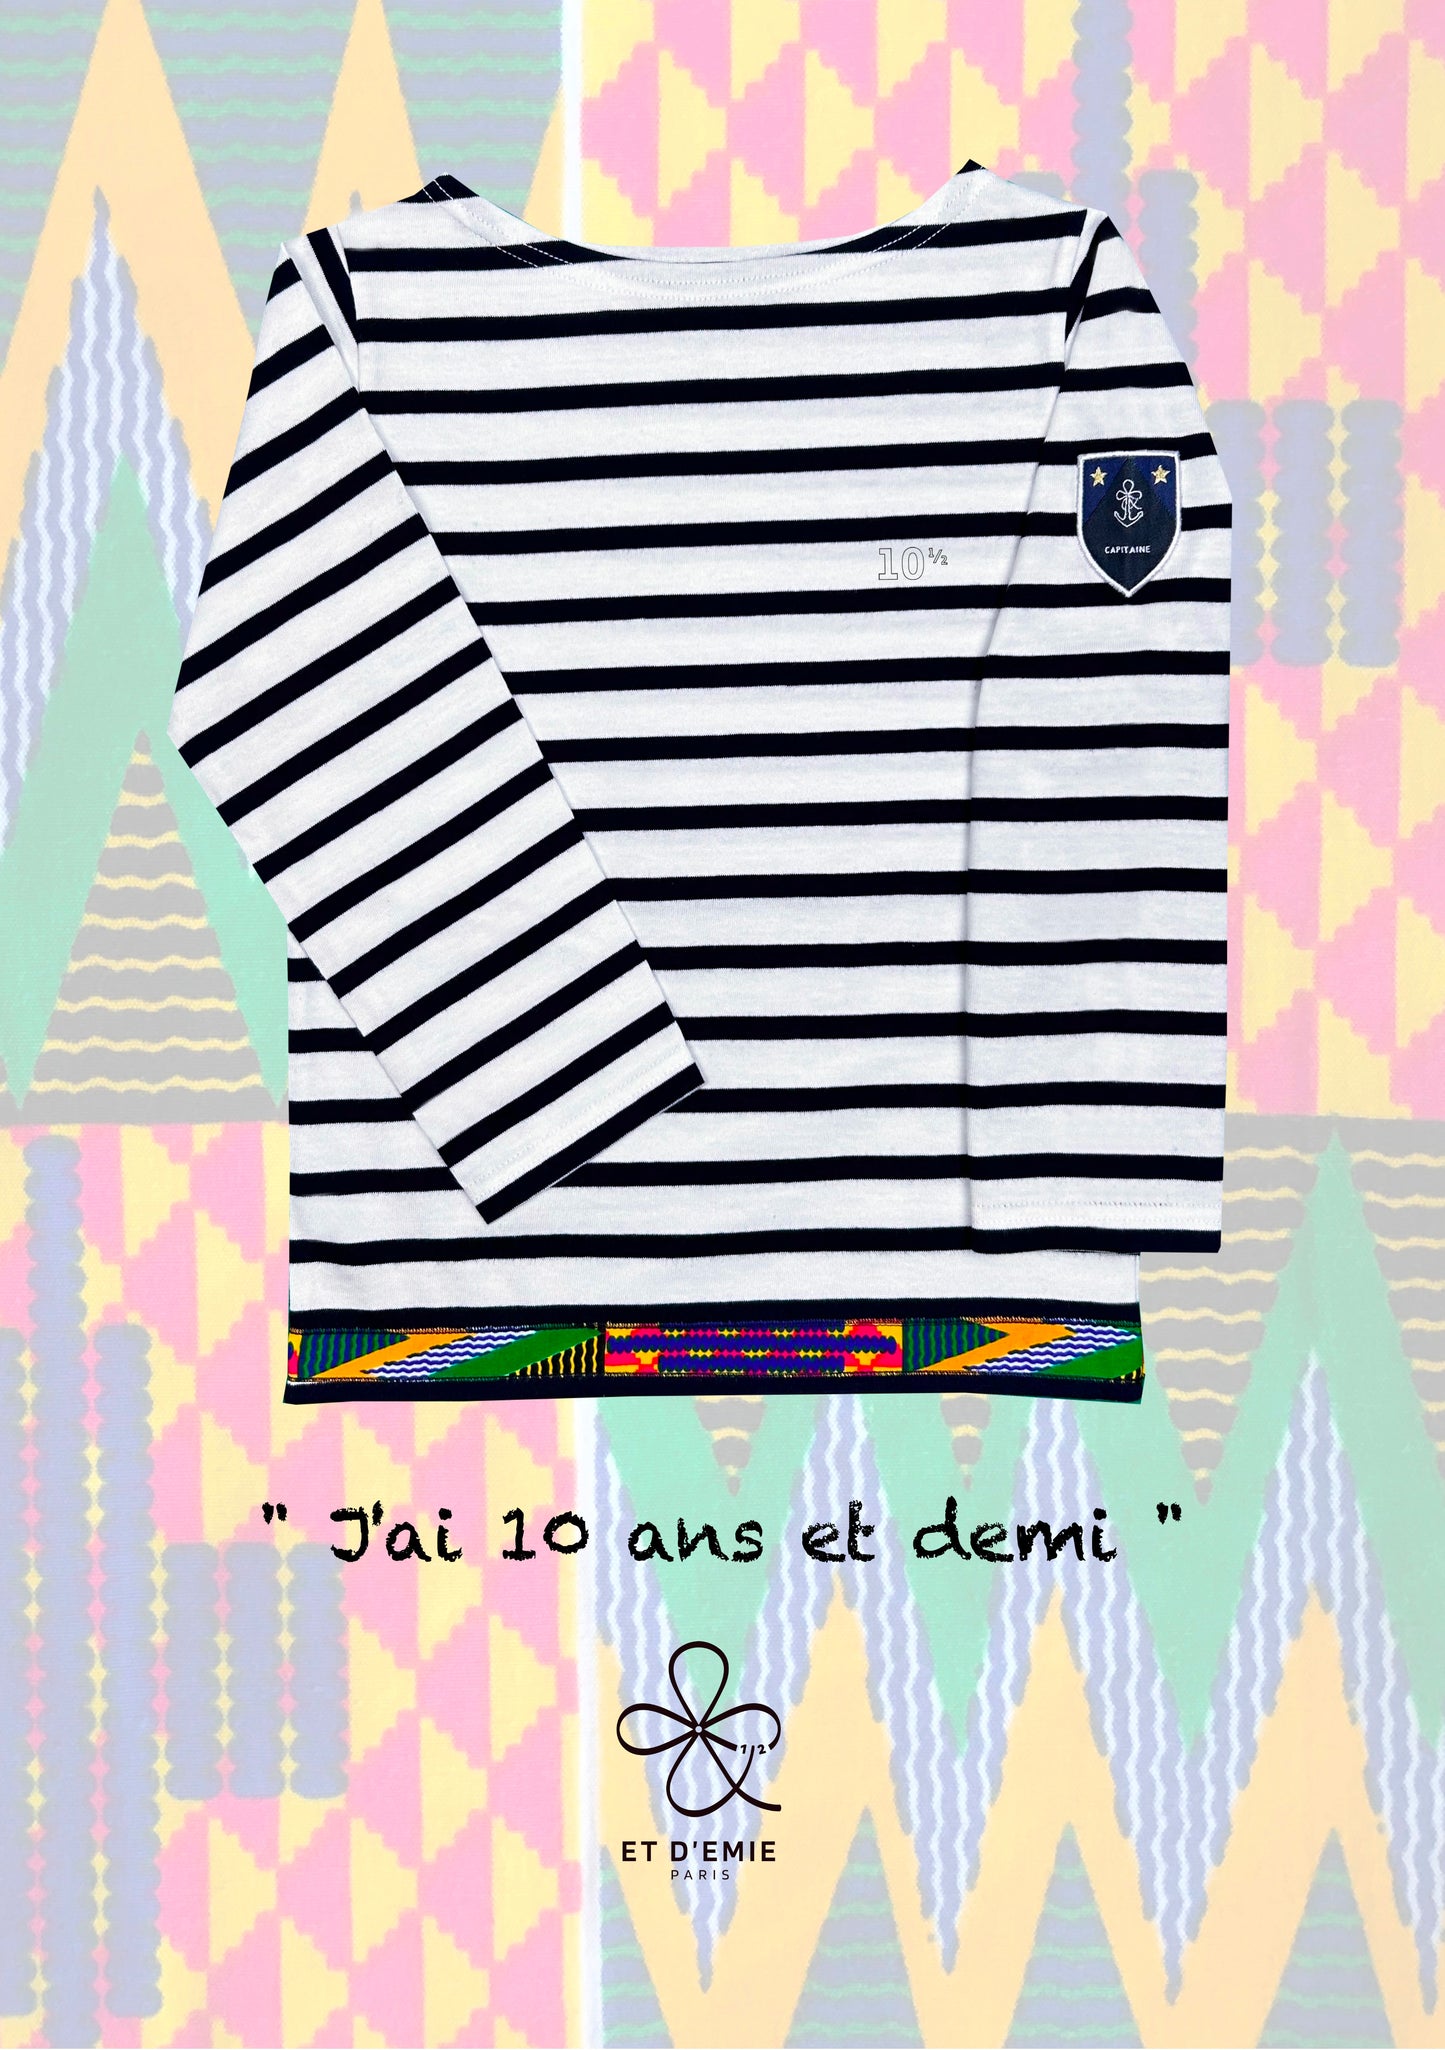 CAPTAIN sailor shirt "I'm 10 and a half years old" embroidered in organic cotton and wax 🇫🇷